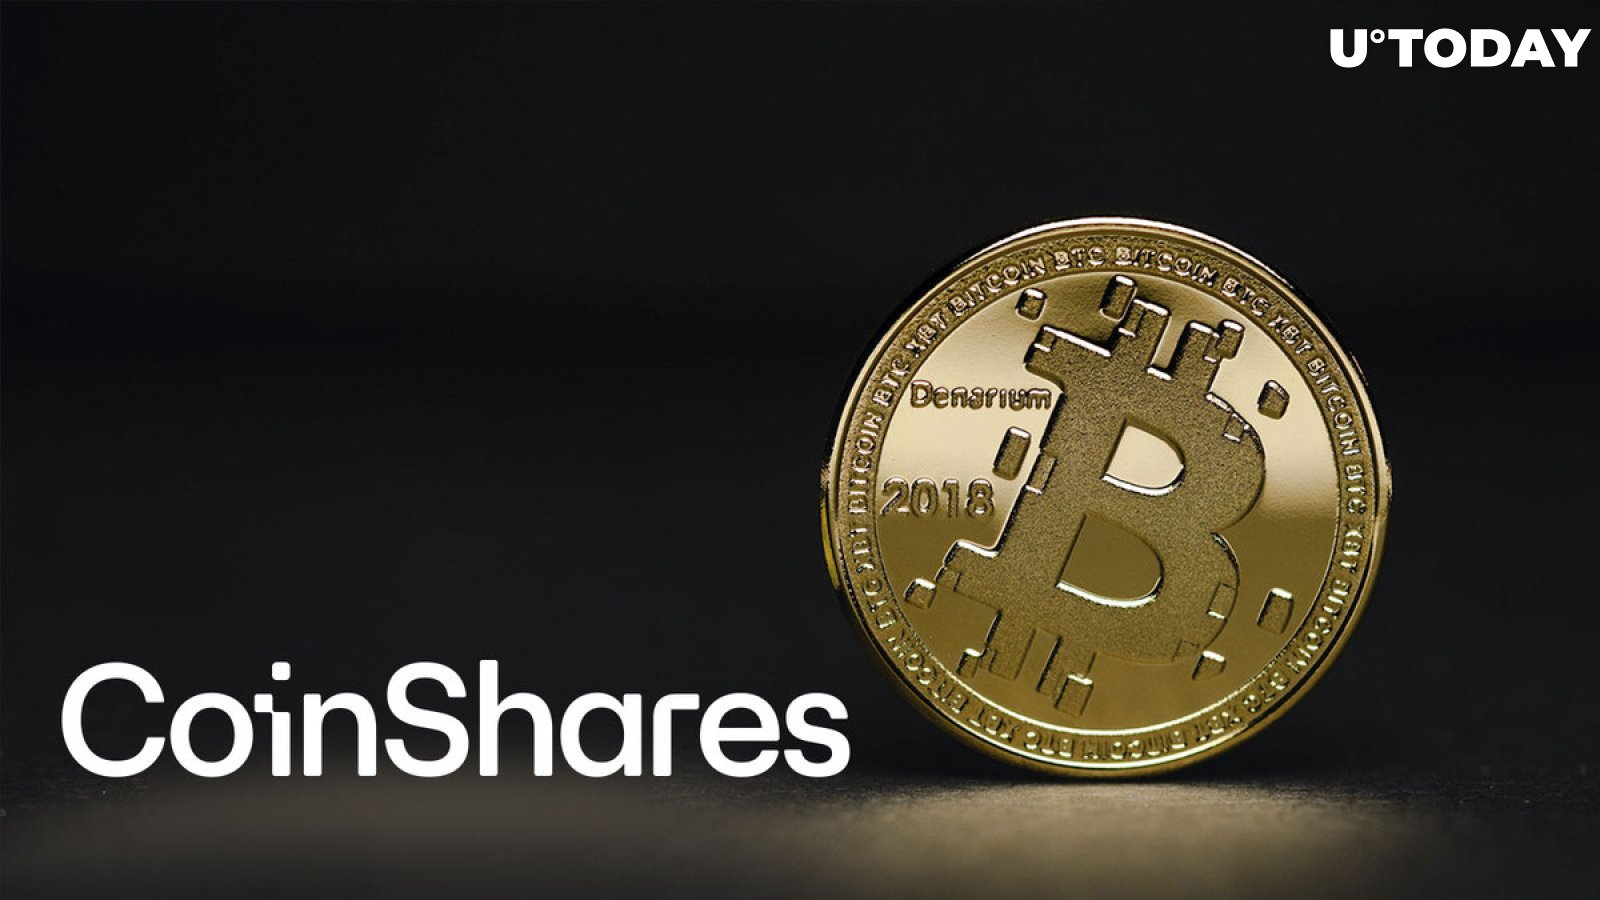 Bitcoin (BTC) Funds Attracted $310 Million in Last Four Weeks, CoinShares Says